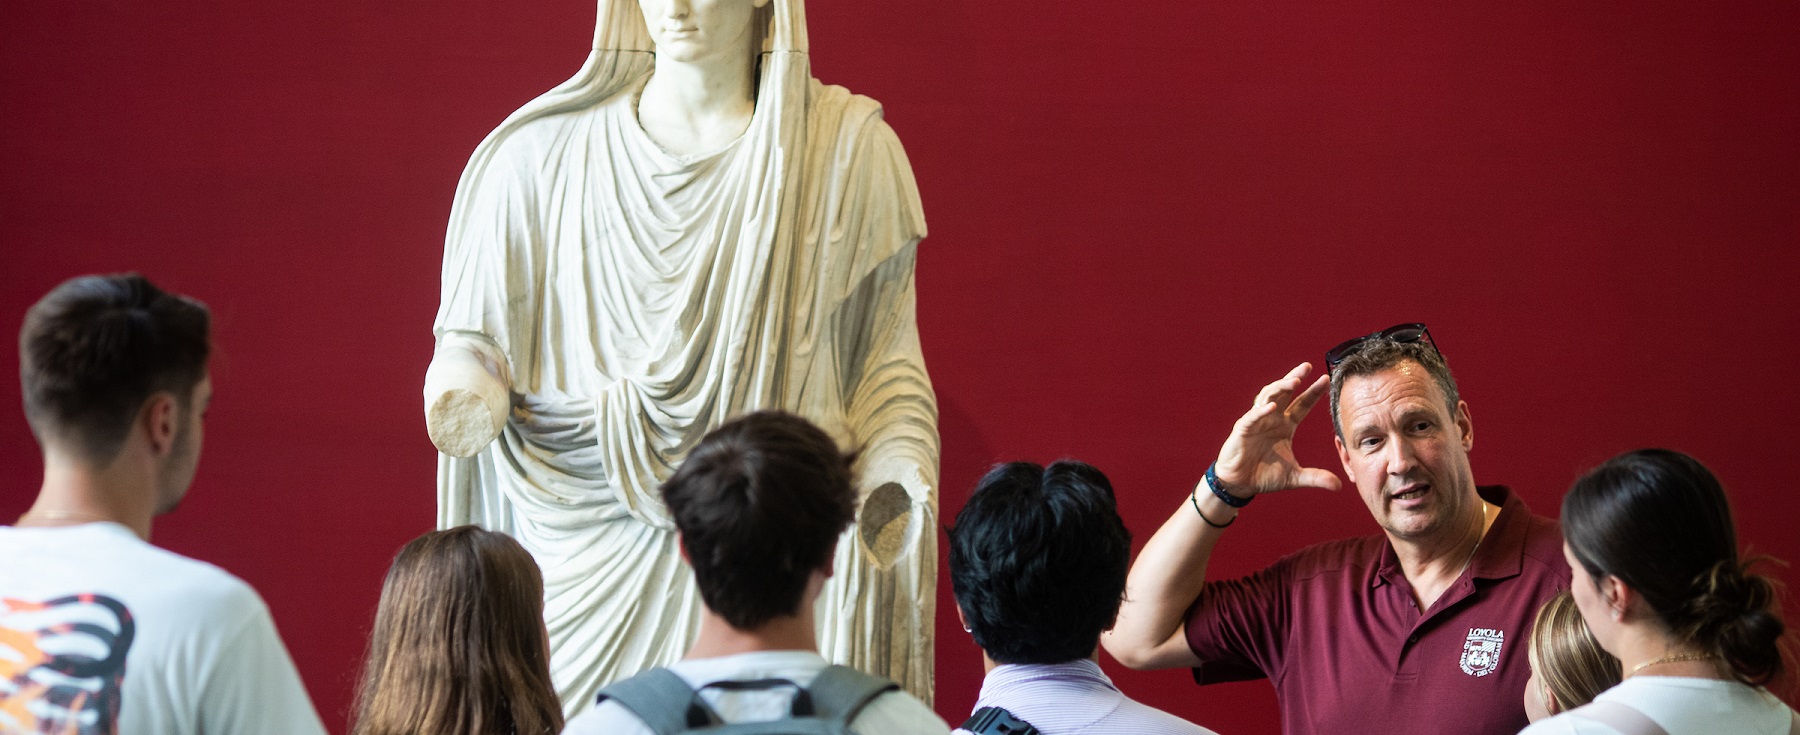 Professor Alexander Ever teaches his class in a museum in Rome